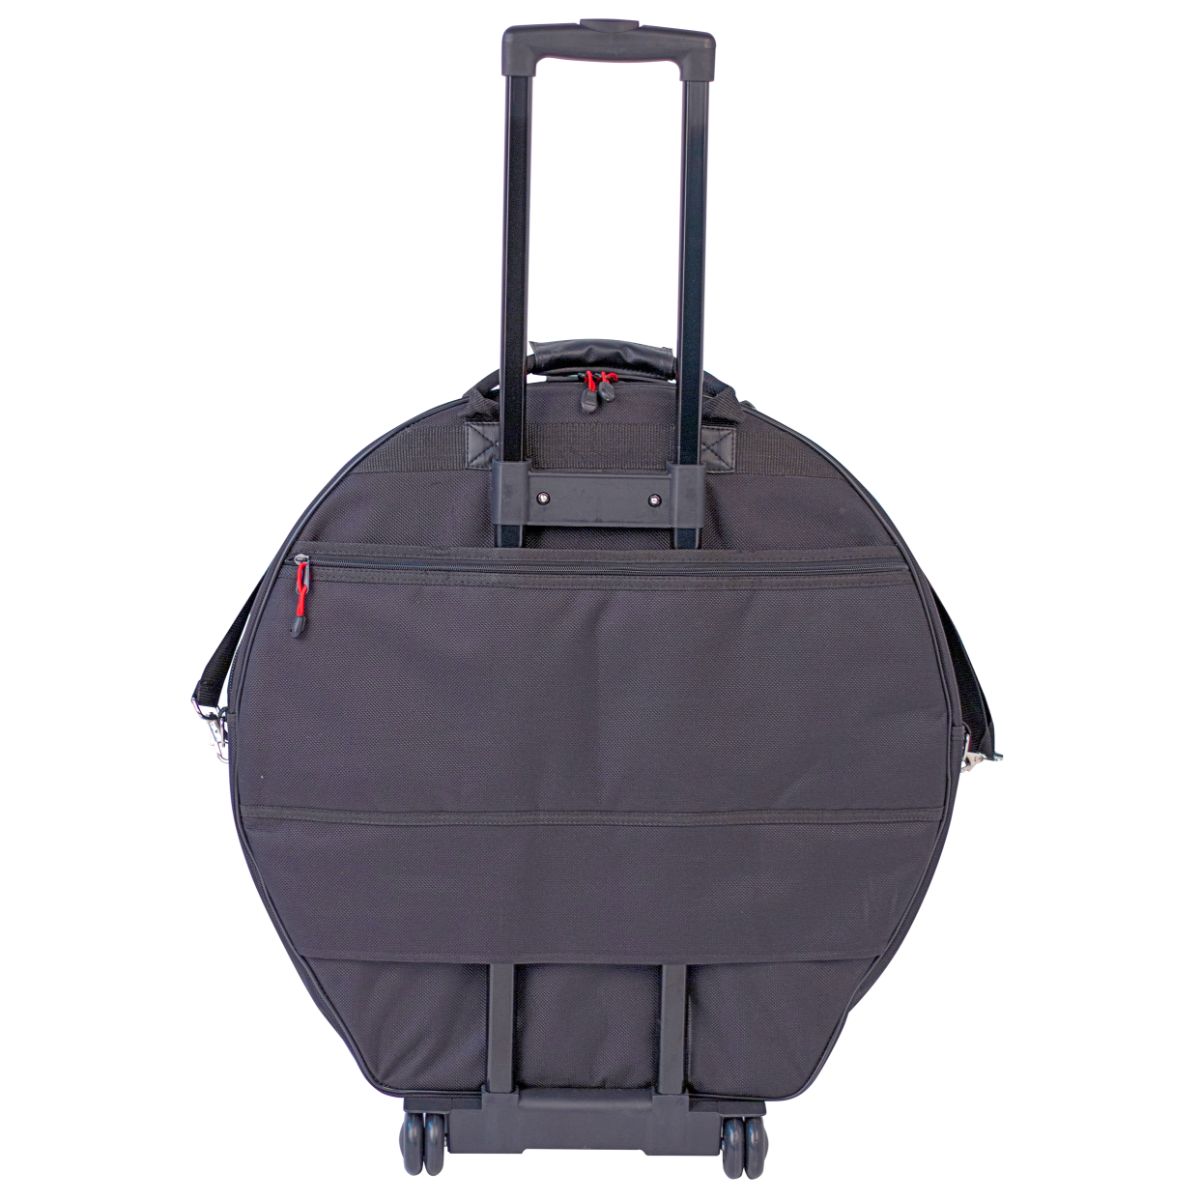 Xtreme 22" Cymbal Bag with Wheels